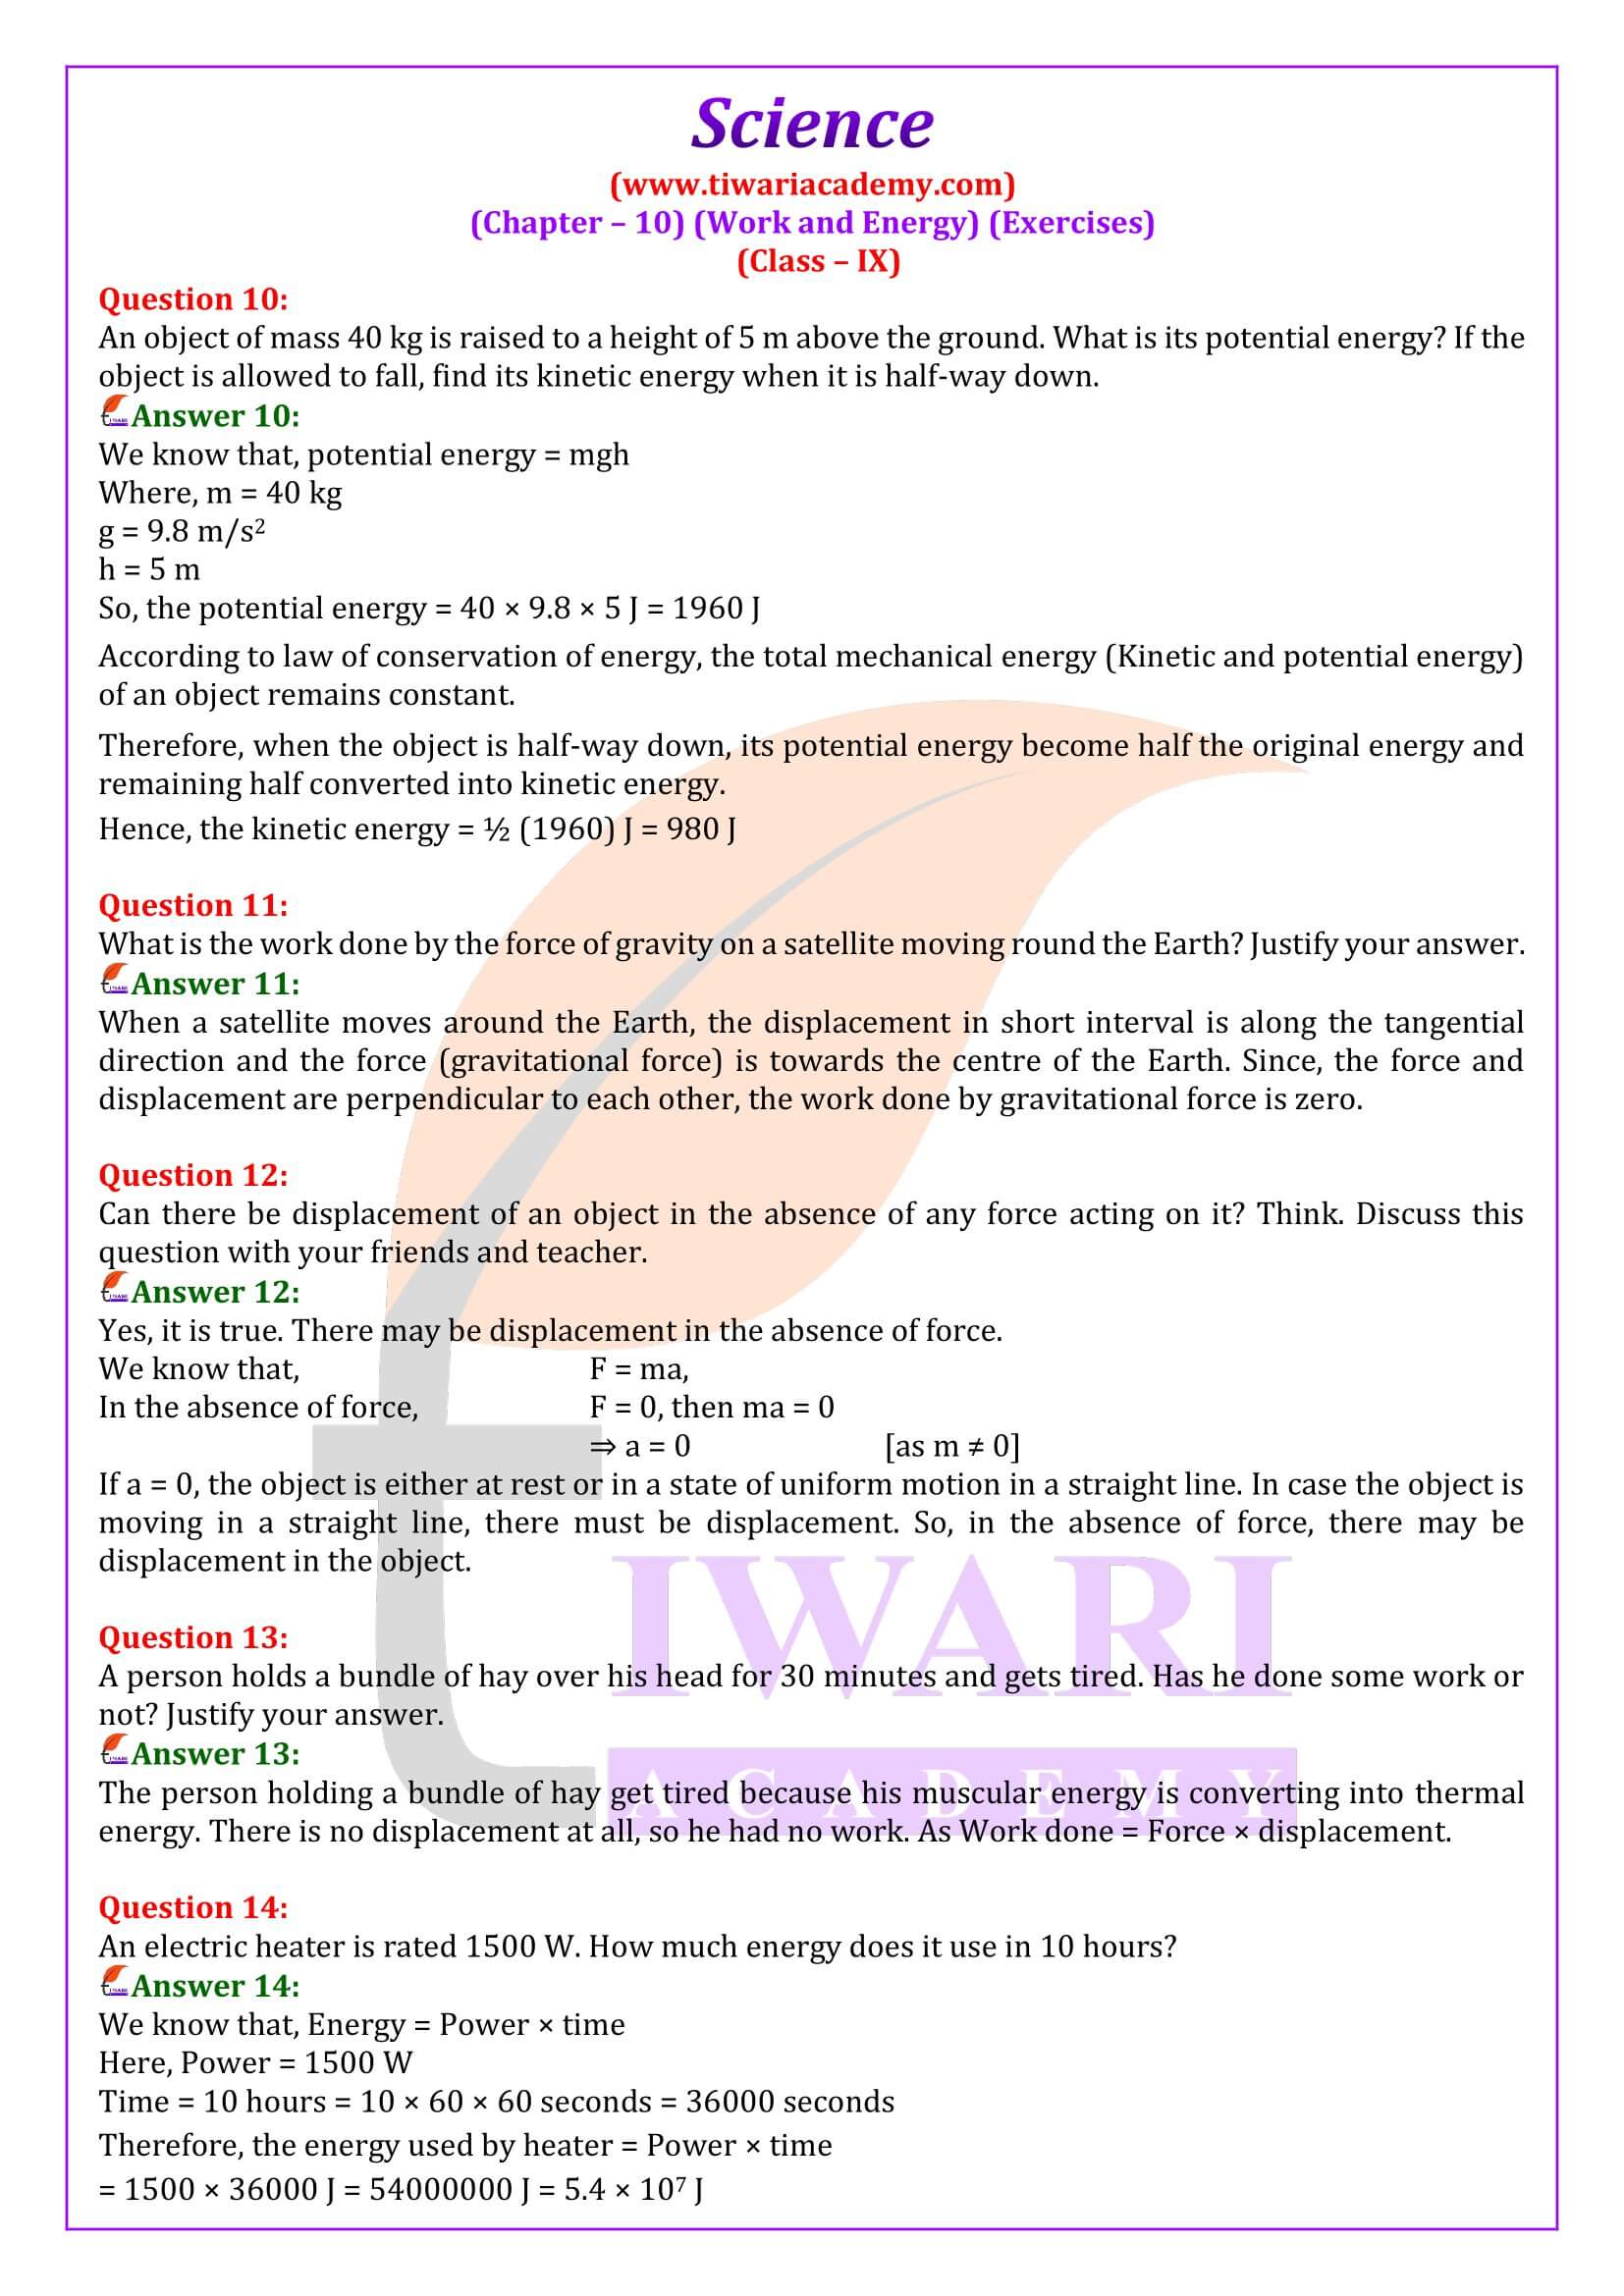 NCERT Solutions for Class 9 Science Chapter 10 Exercises